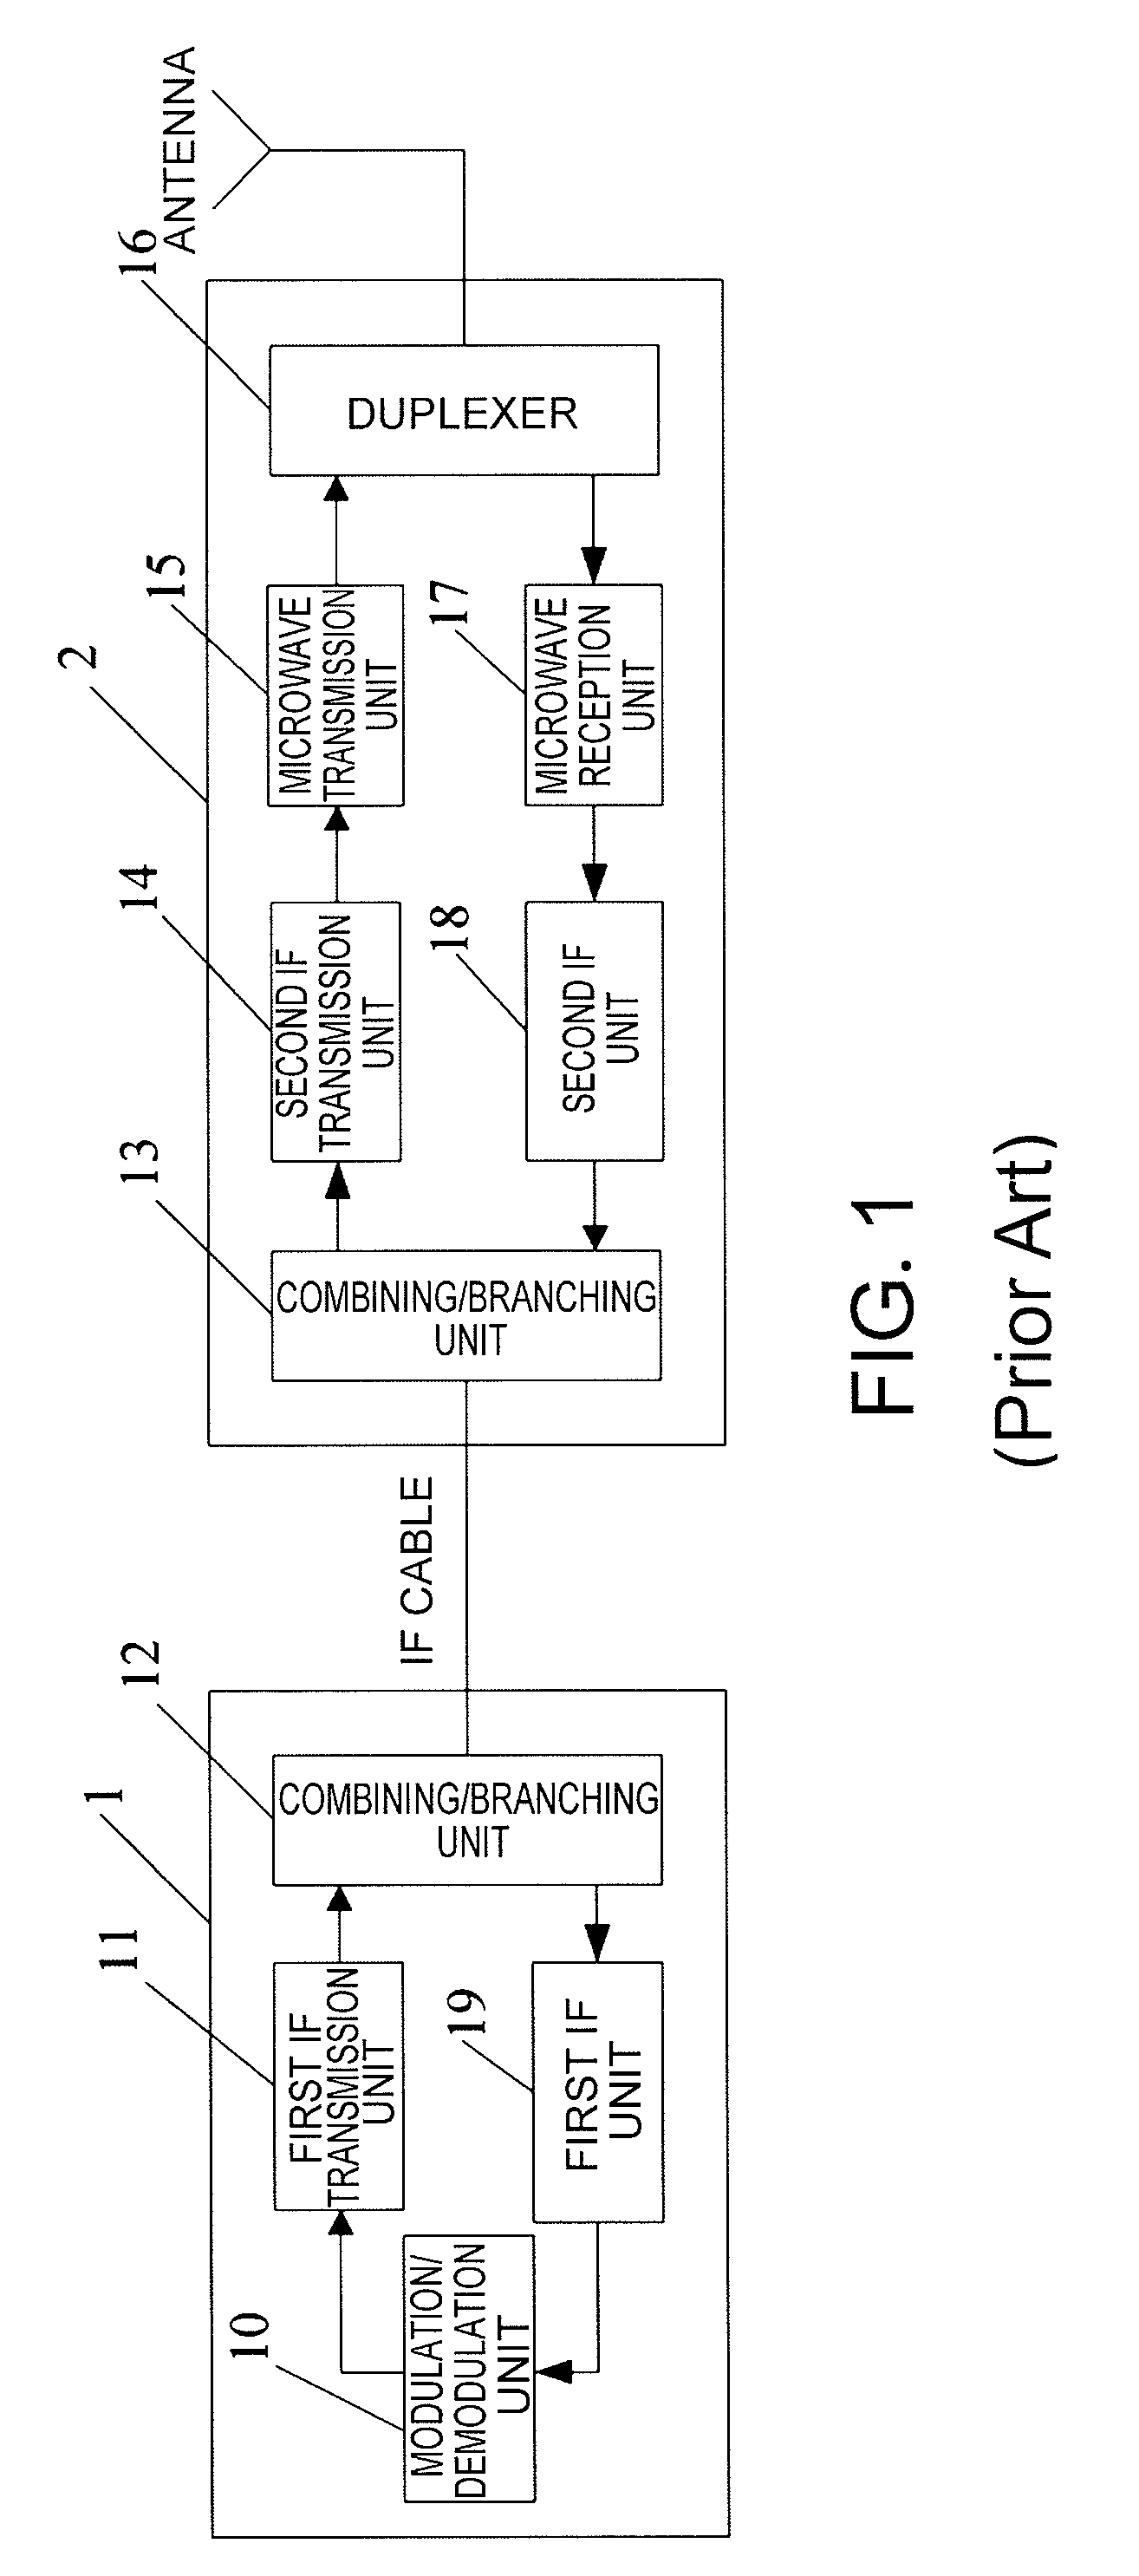 Method and apparatus for transmitting/receiving signals in a microwave system